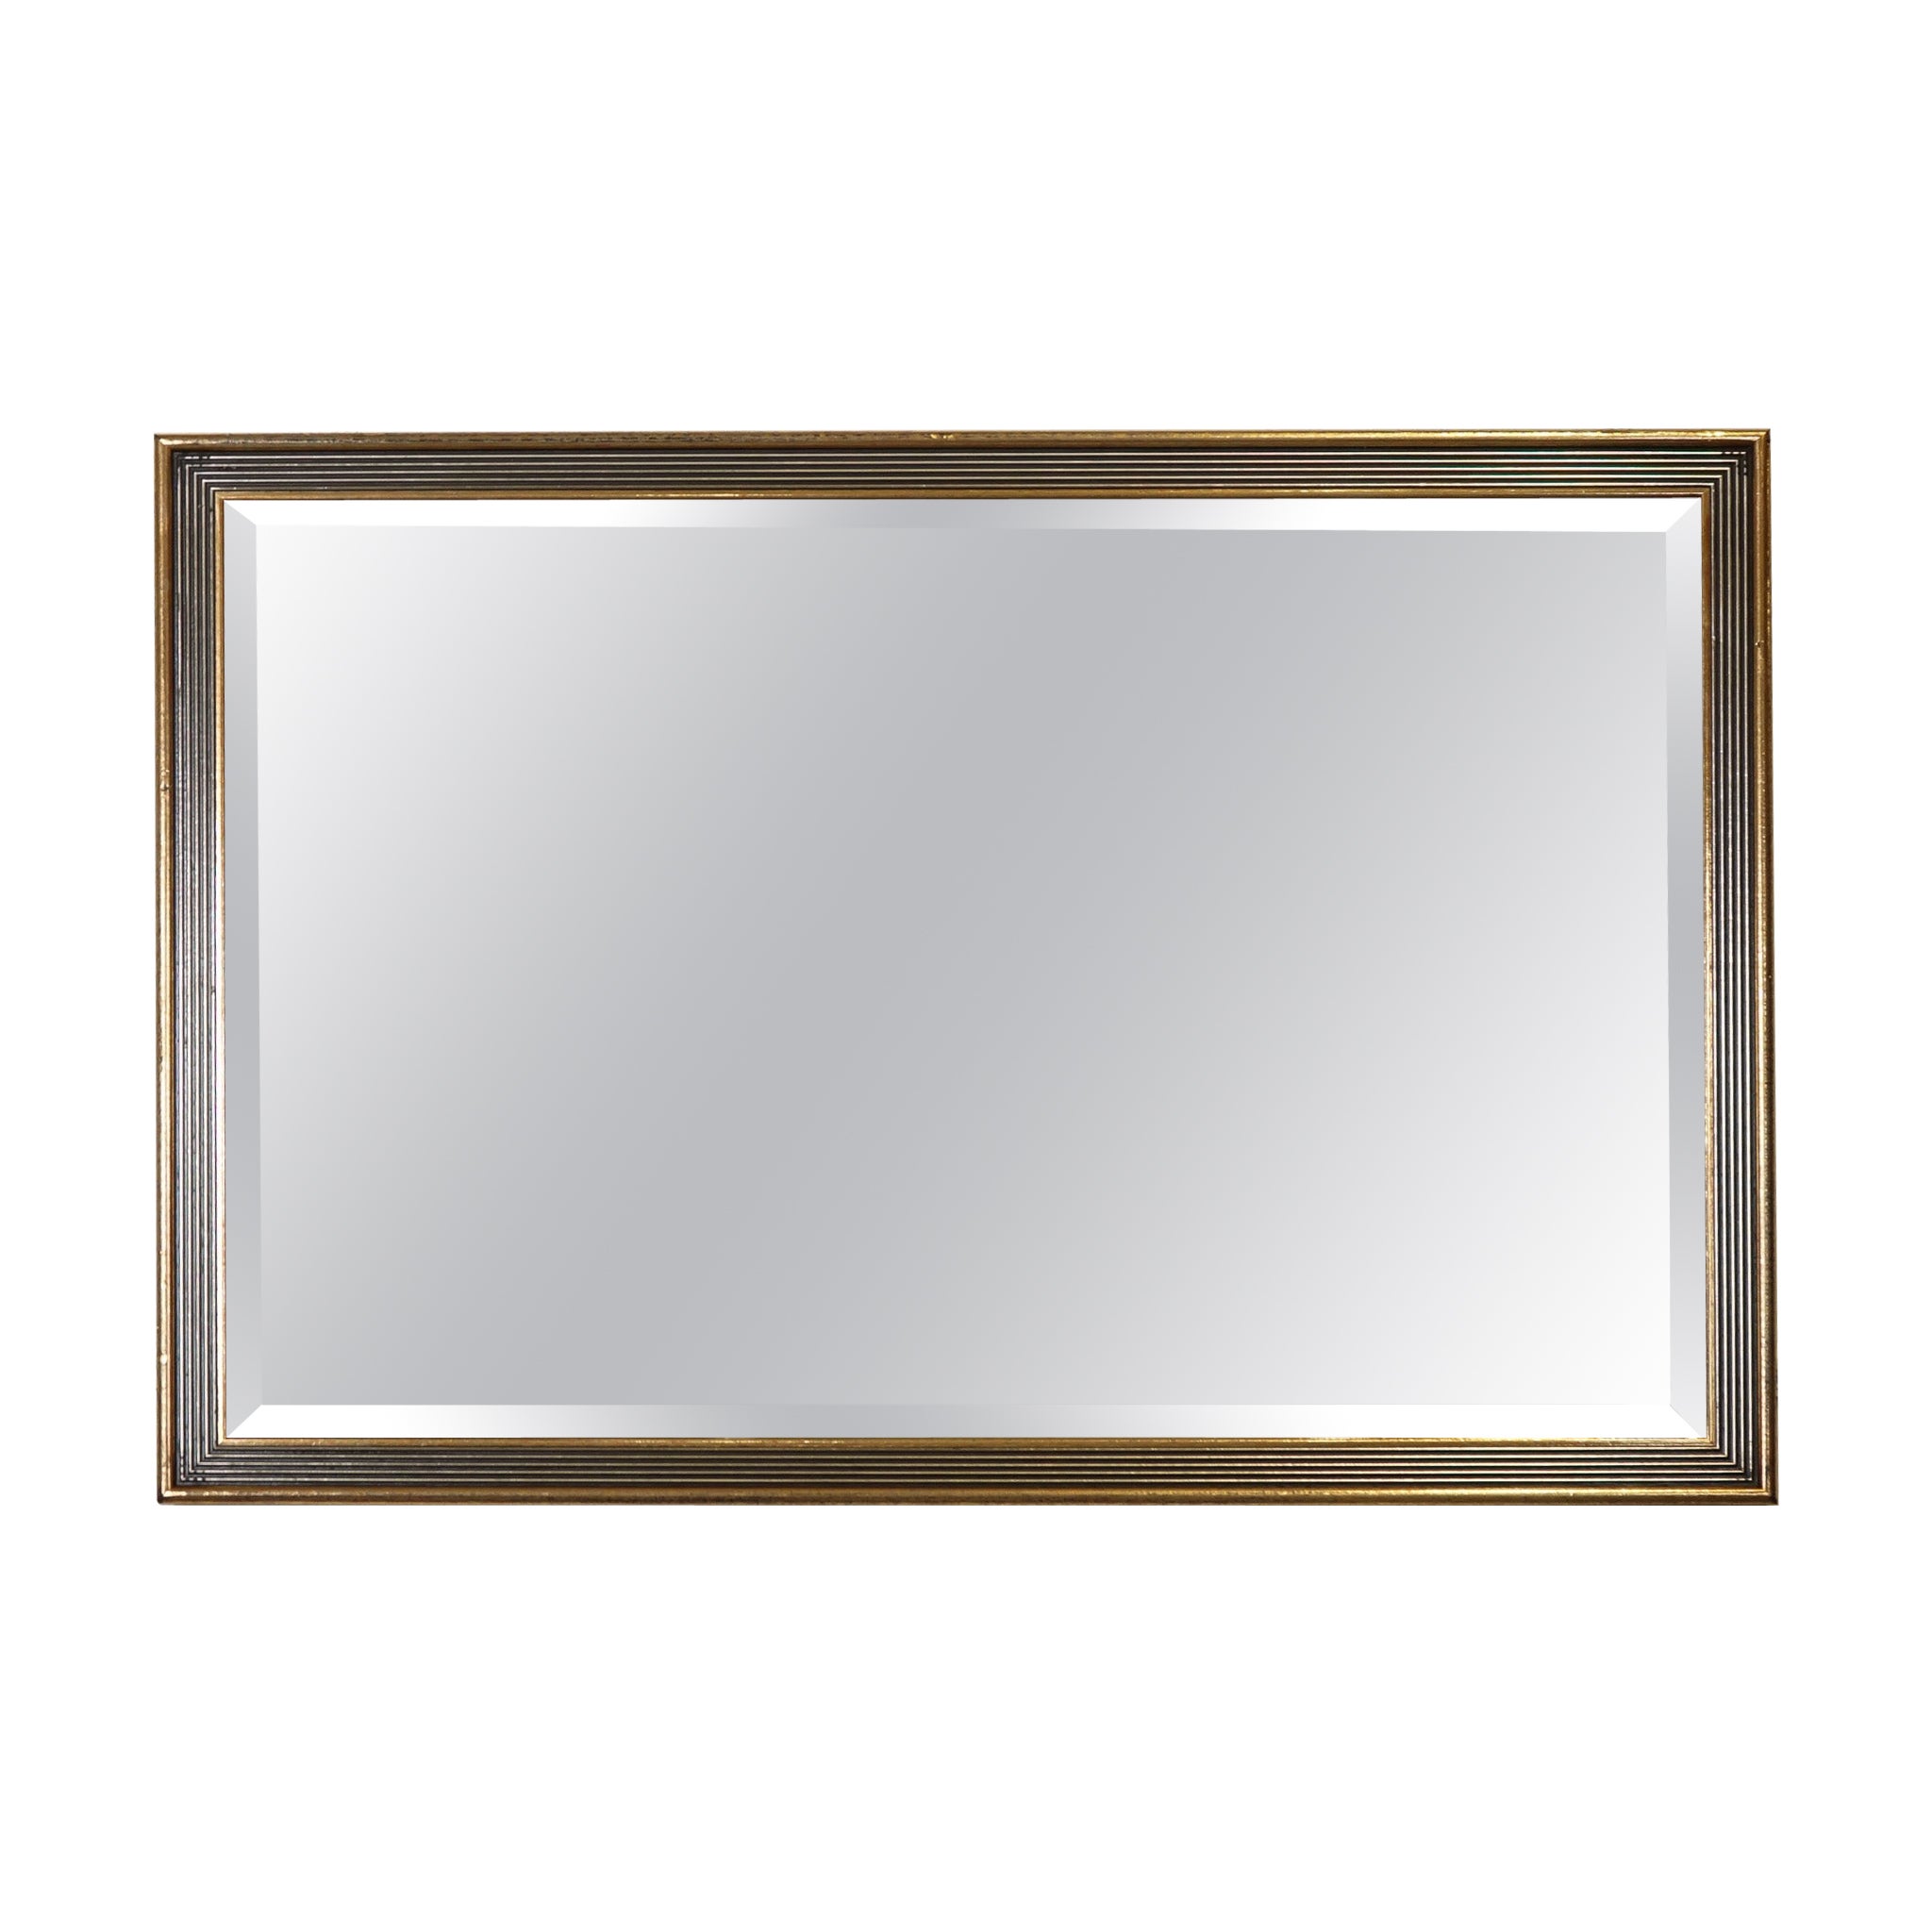 BEAUTIFUL GOLD & SILVER BEVELLED MIRROR j1